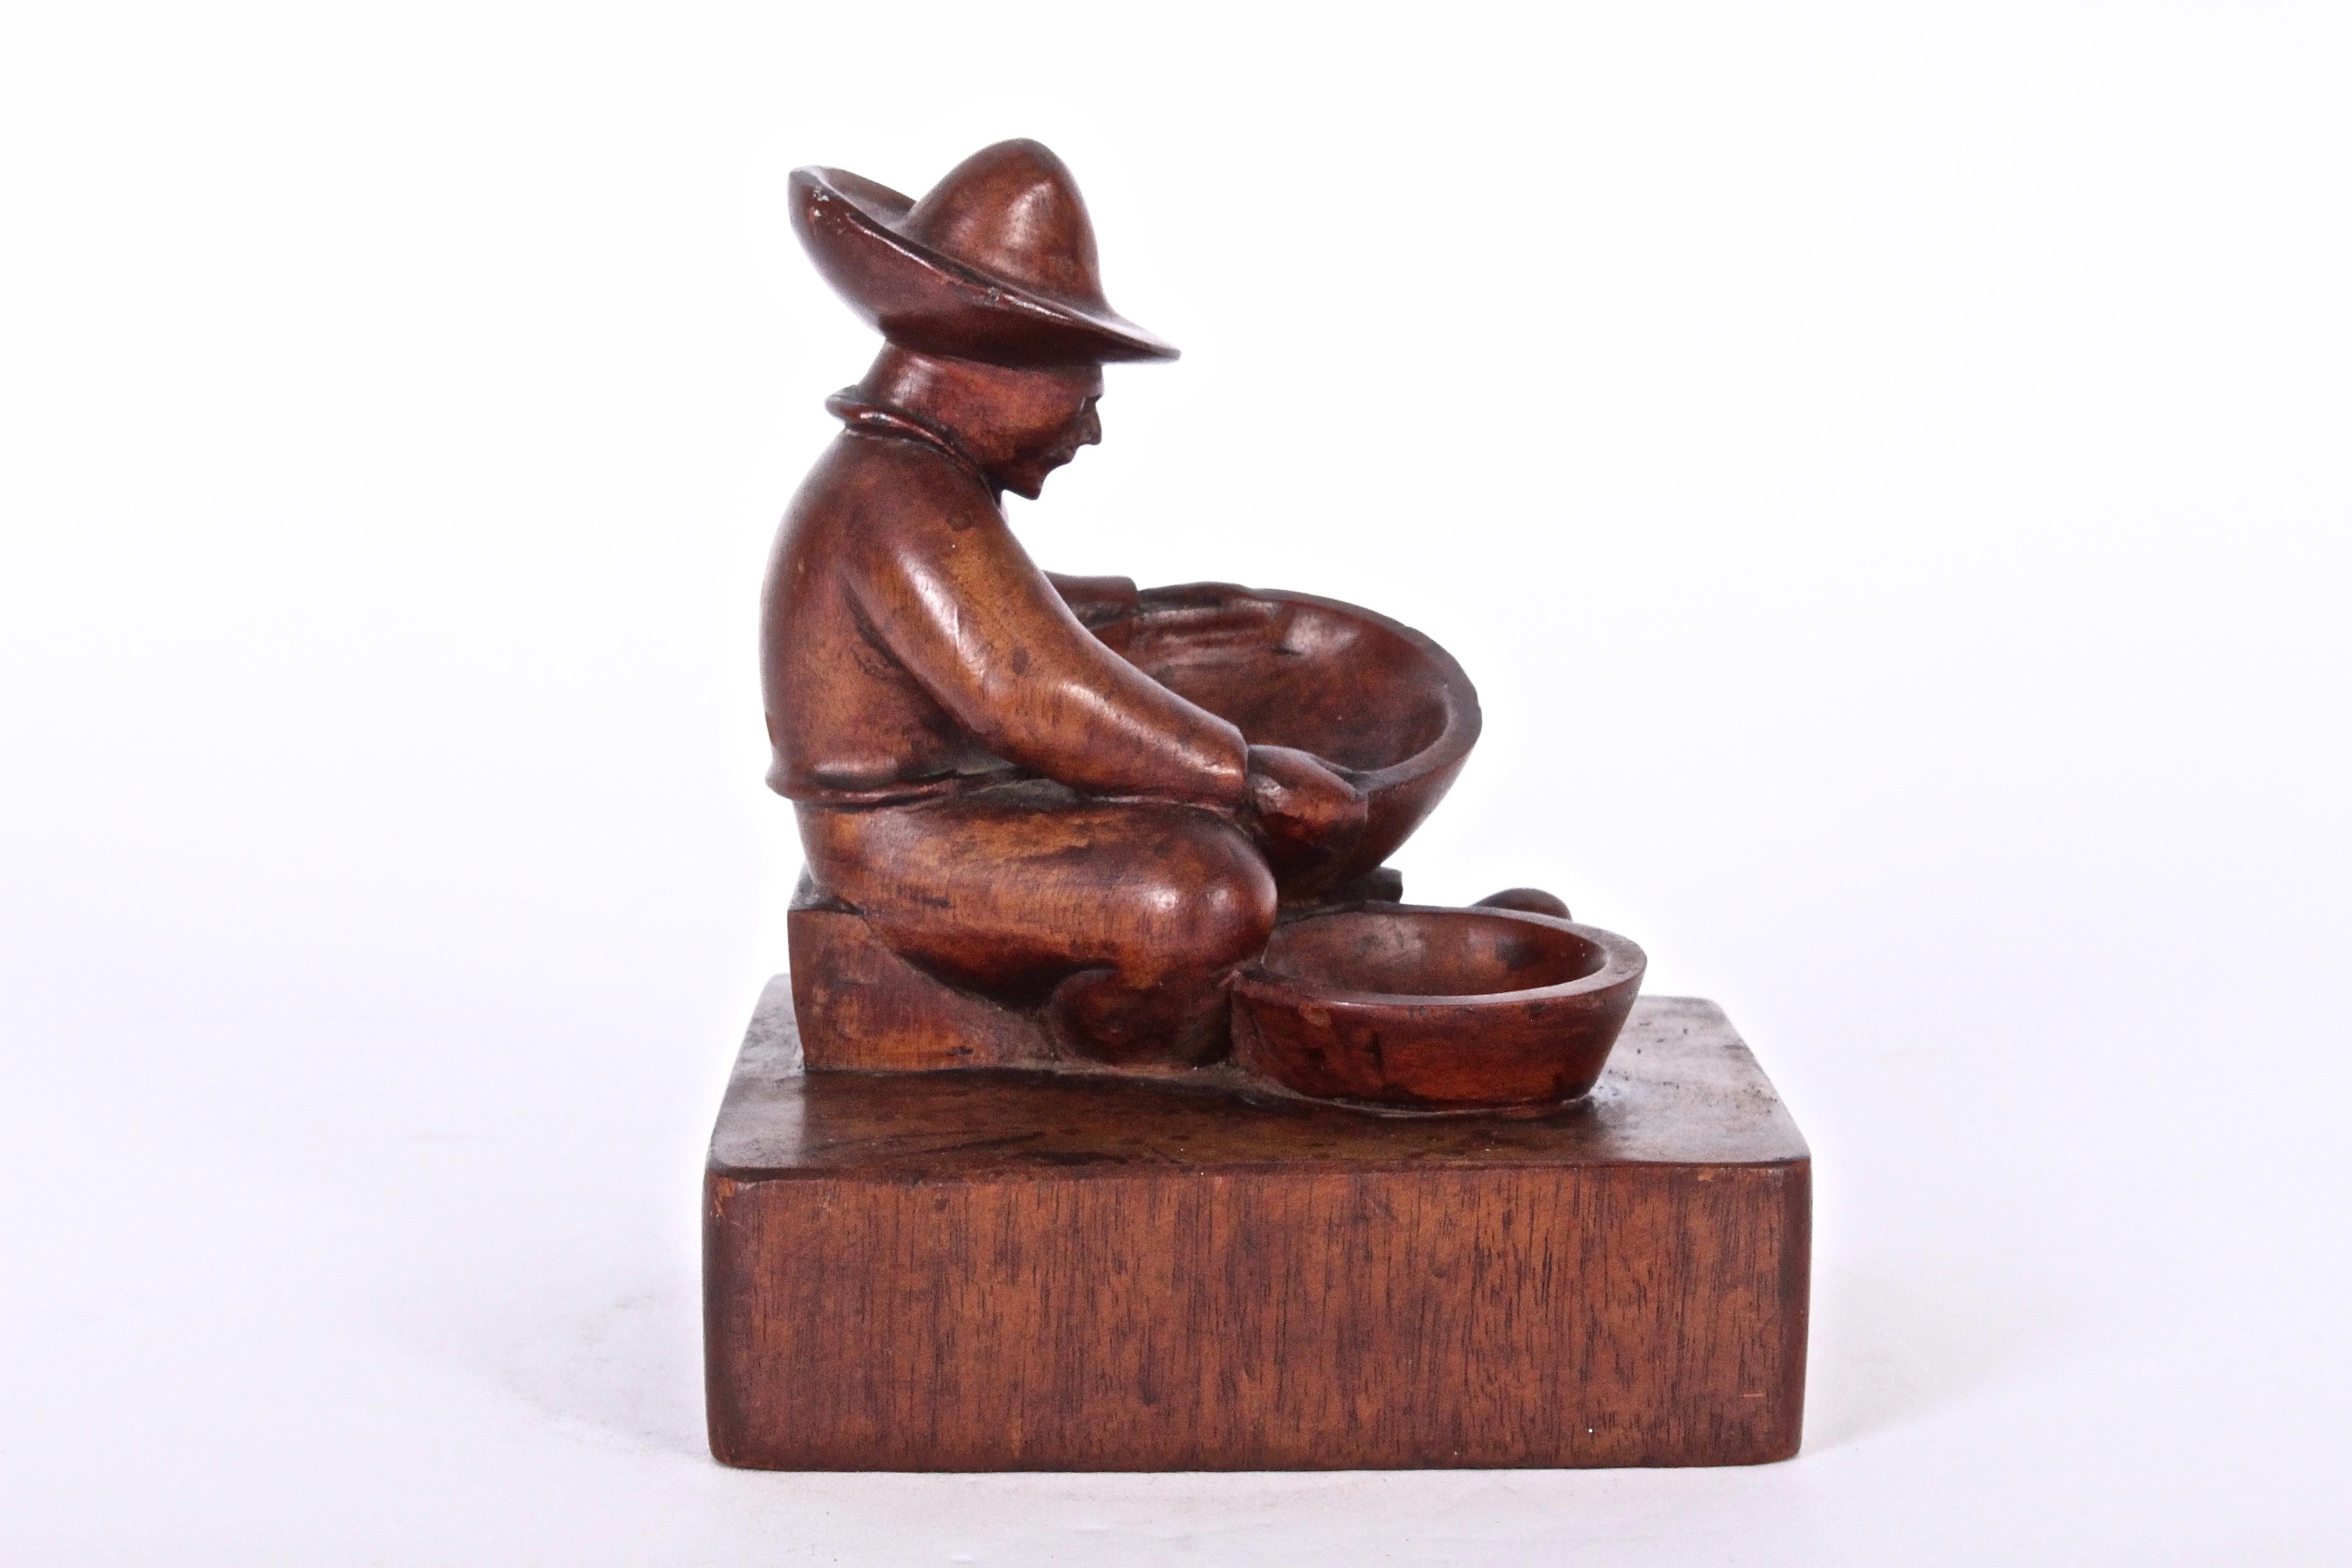 Early 20th century Mexican hand carved Folk Art figurative small mahogany jewelry bowl by T. D. Somes. Featuring a hand carved seated man with hat & two bowls elevated on a square wood base. Sanded. Polished. Finished. Hand-sculpted. Primitive.